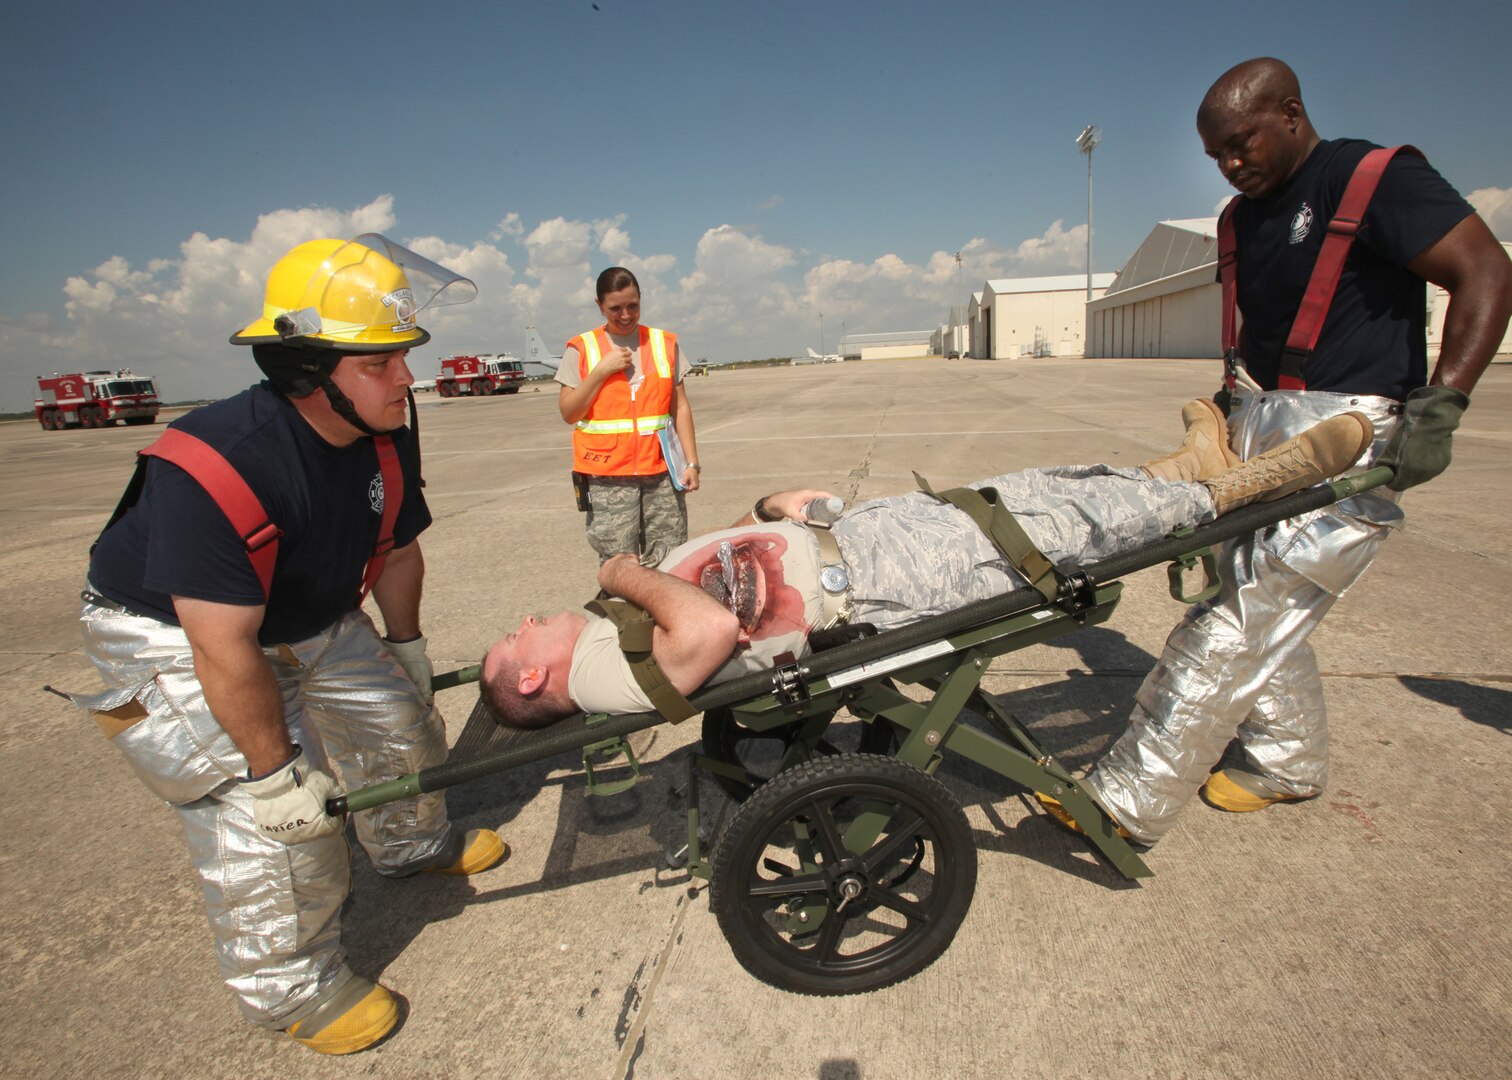 Members of the 802nd Civil Engineer Squadron transport a simulated patient during the major accident response exercise Oct. 12. (U.S. Air Force photo/Robbin Cresswell)